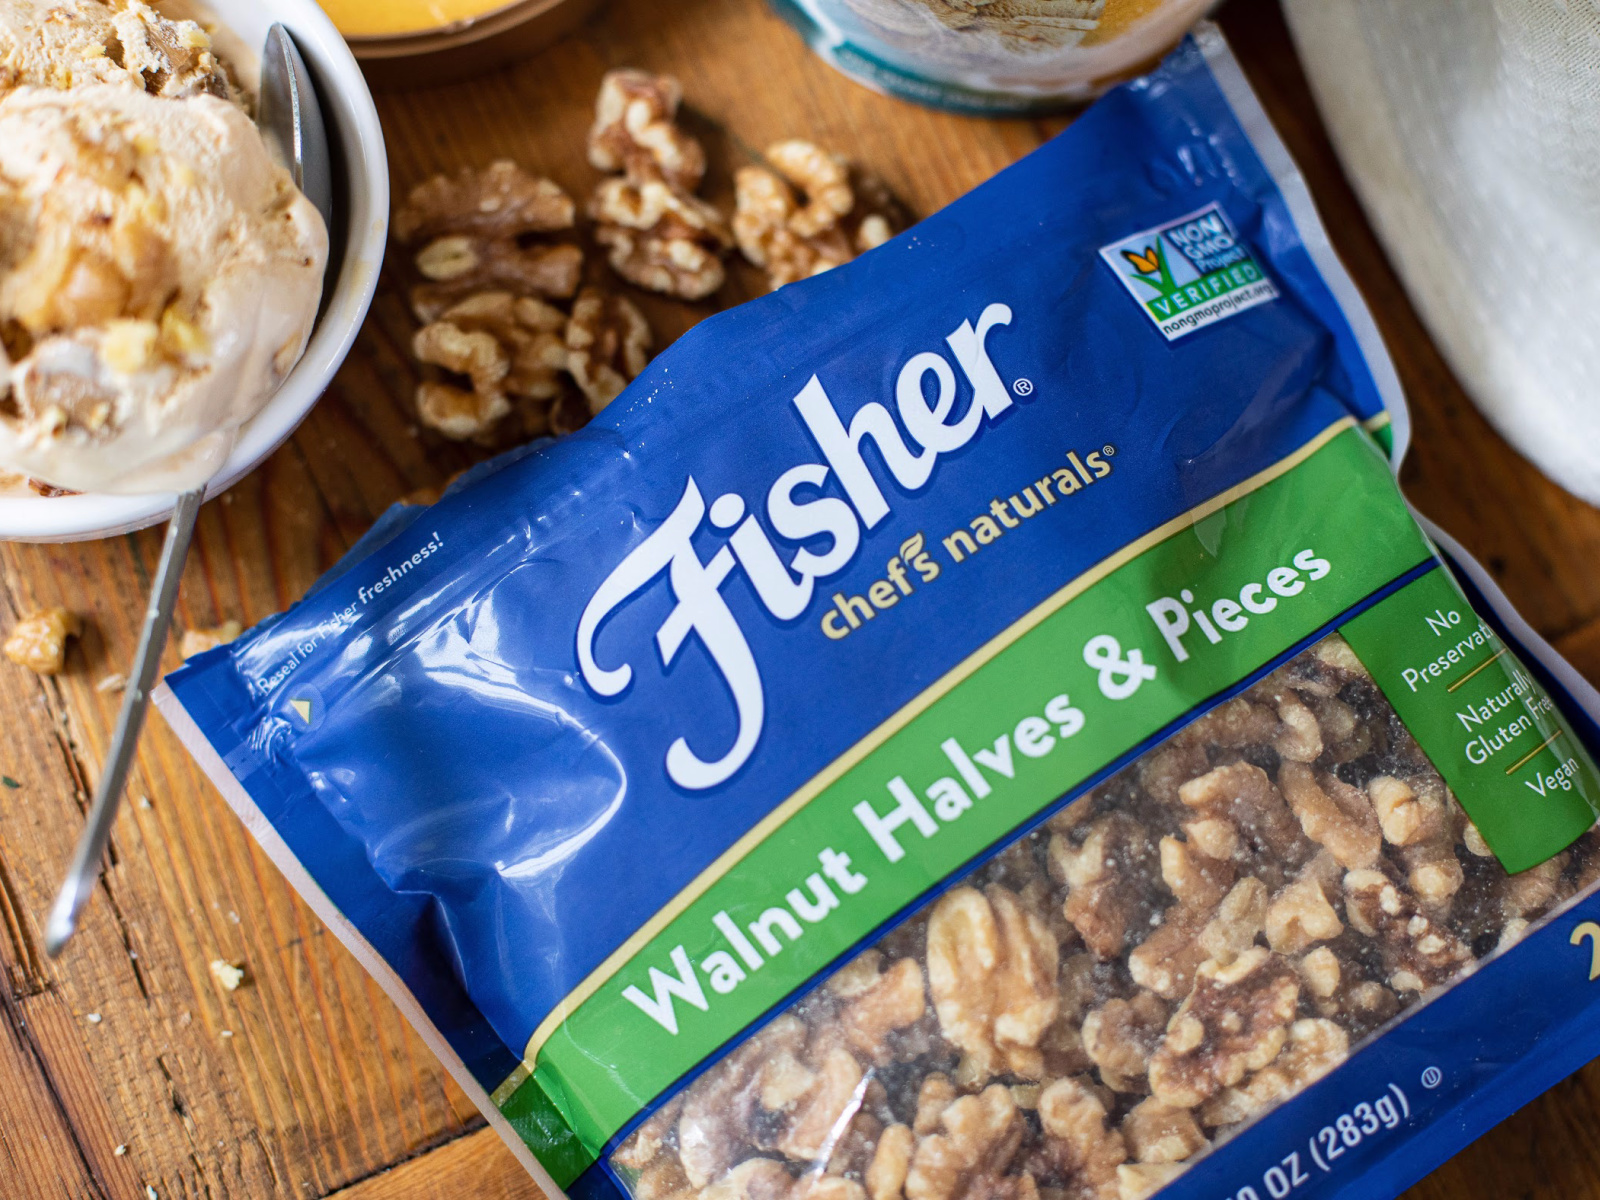 Fisher Chef’s Nuts As Low As $2.30 At Publix